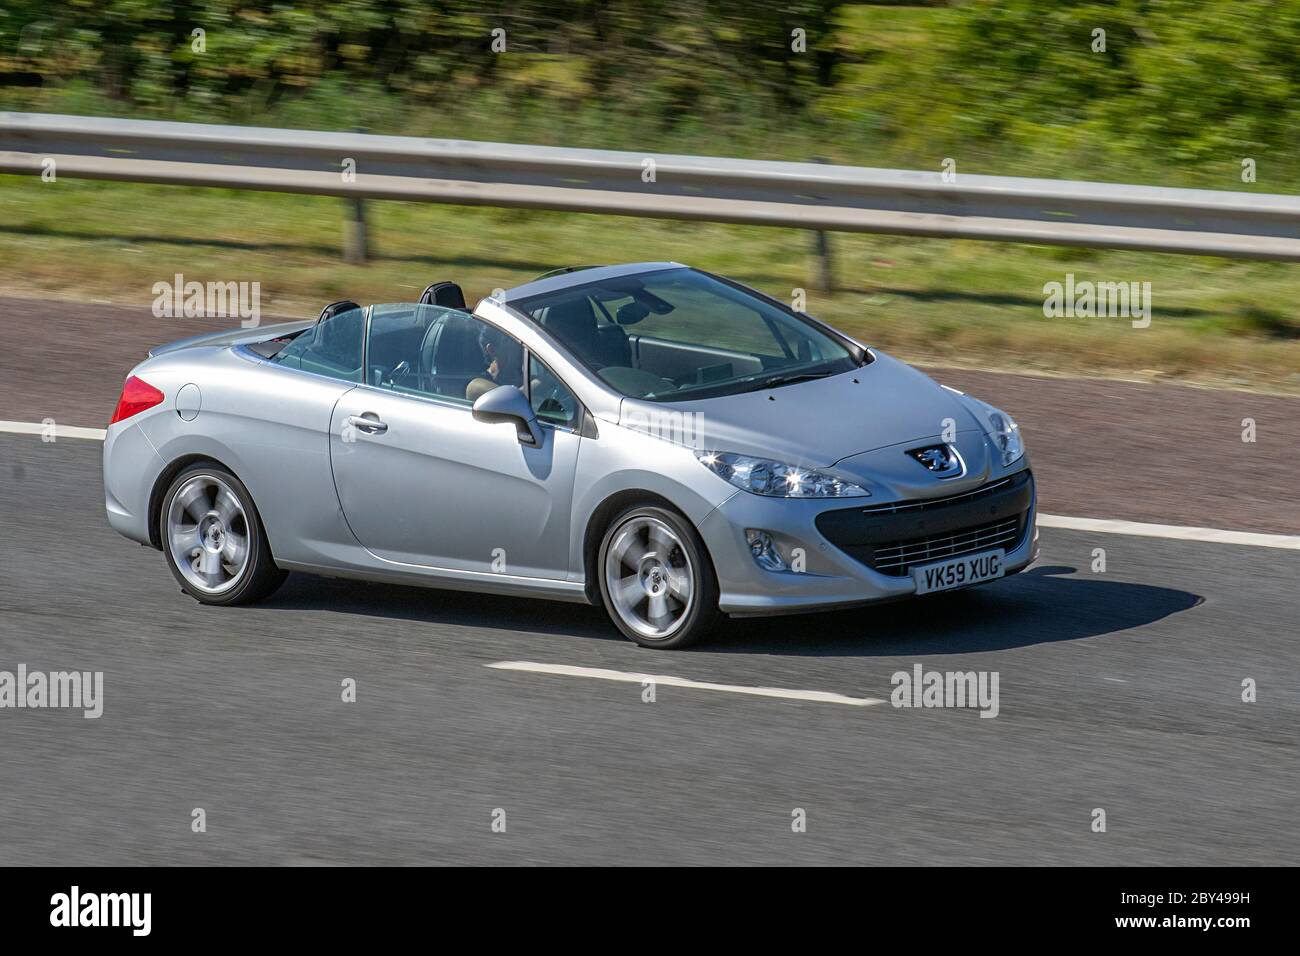 2009 silver Peugeot 308 CC GT HDI cabriolet; Vehicular traffic moving vehicles, cars driving vehicle on UK roads, motors, motoring on the M6 motorway highway Stock Photo